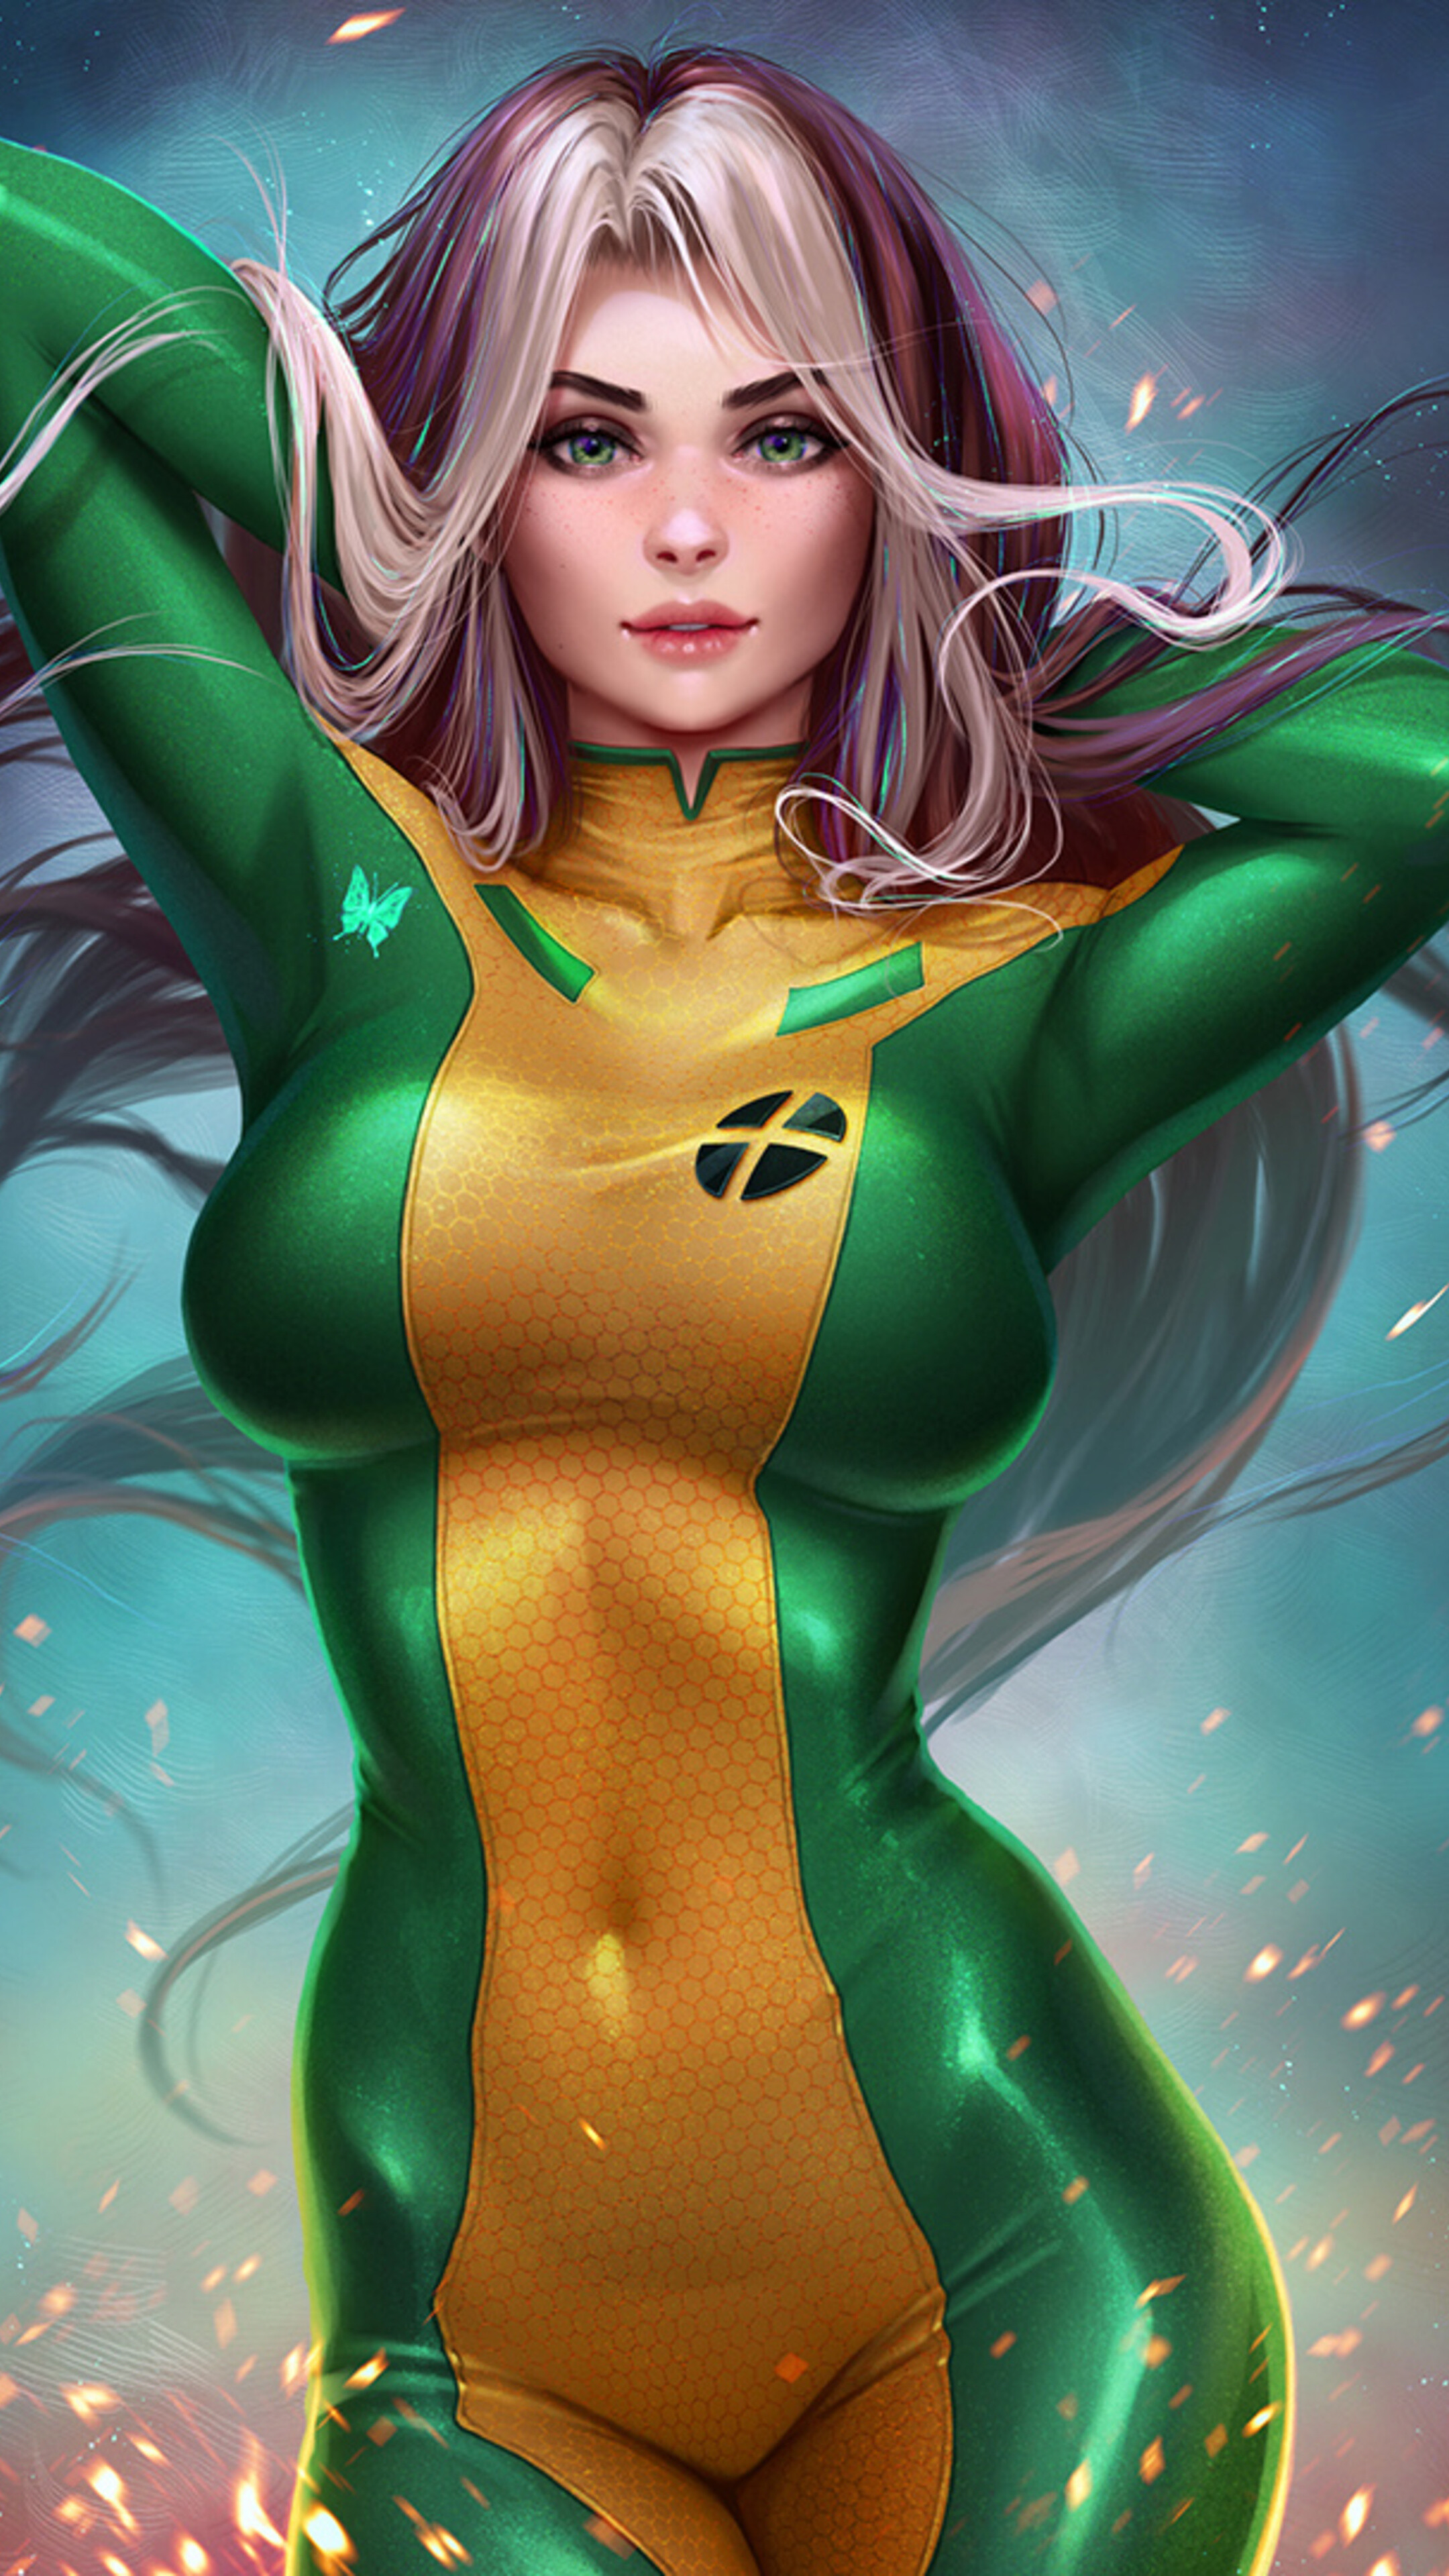 Rogue (Marvel): X-men, The character was created by Chris Claremont and Michael Golden. 2160x3840 4K Wallpaper.